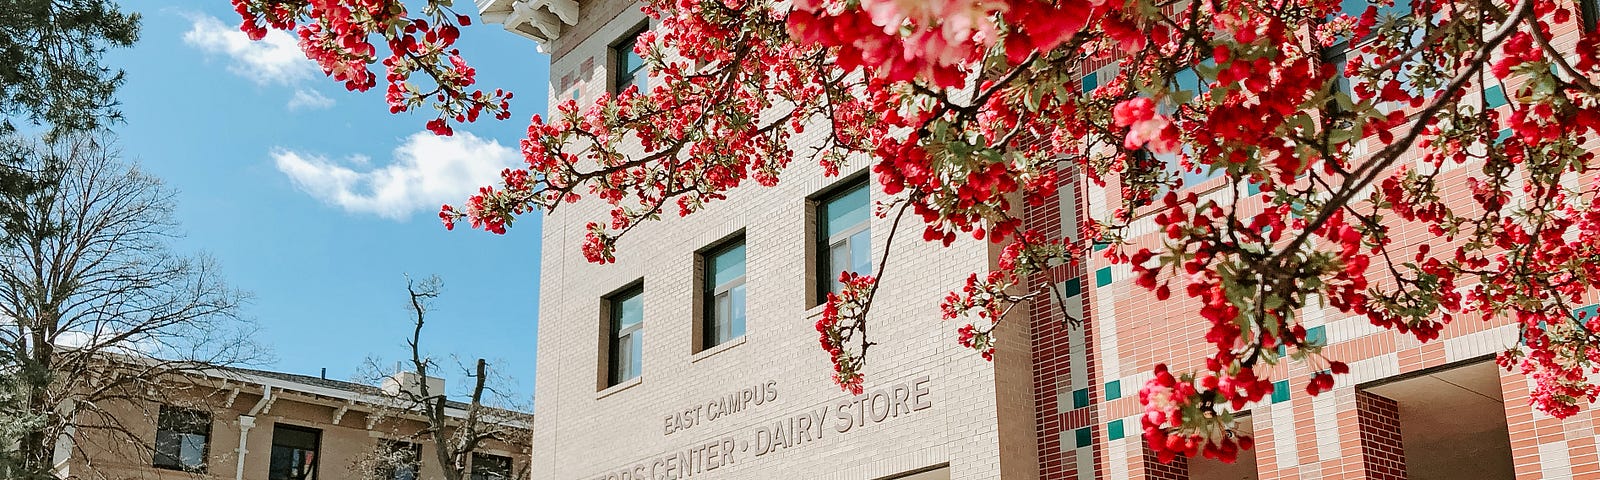 A pink flowering tree frames the entrance to the East Campus Dairy Store